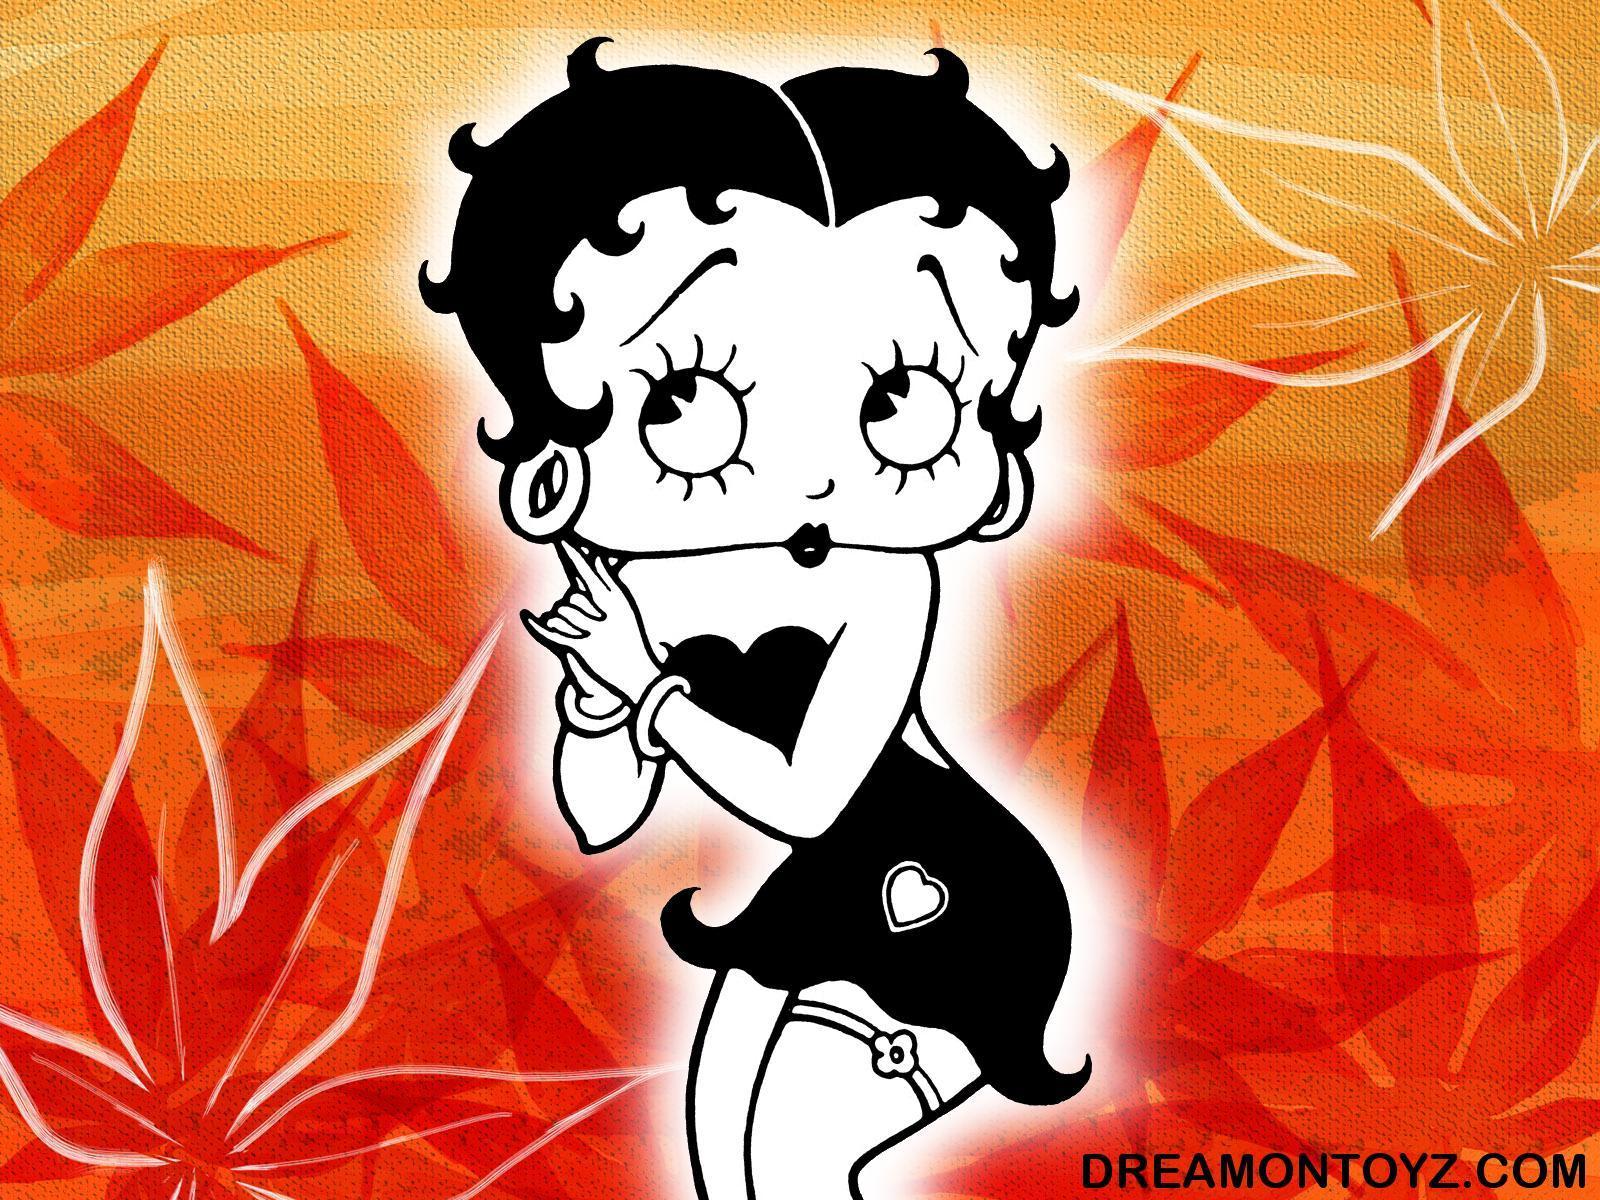 Betty Boop Pictures Archive: Betty Boop Fall backgrounds and